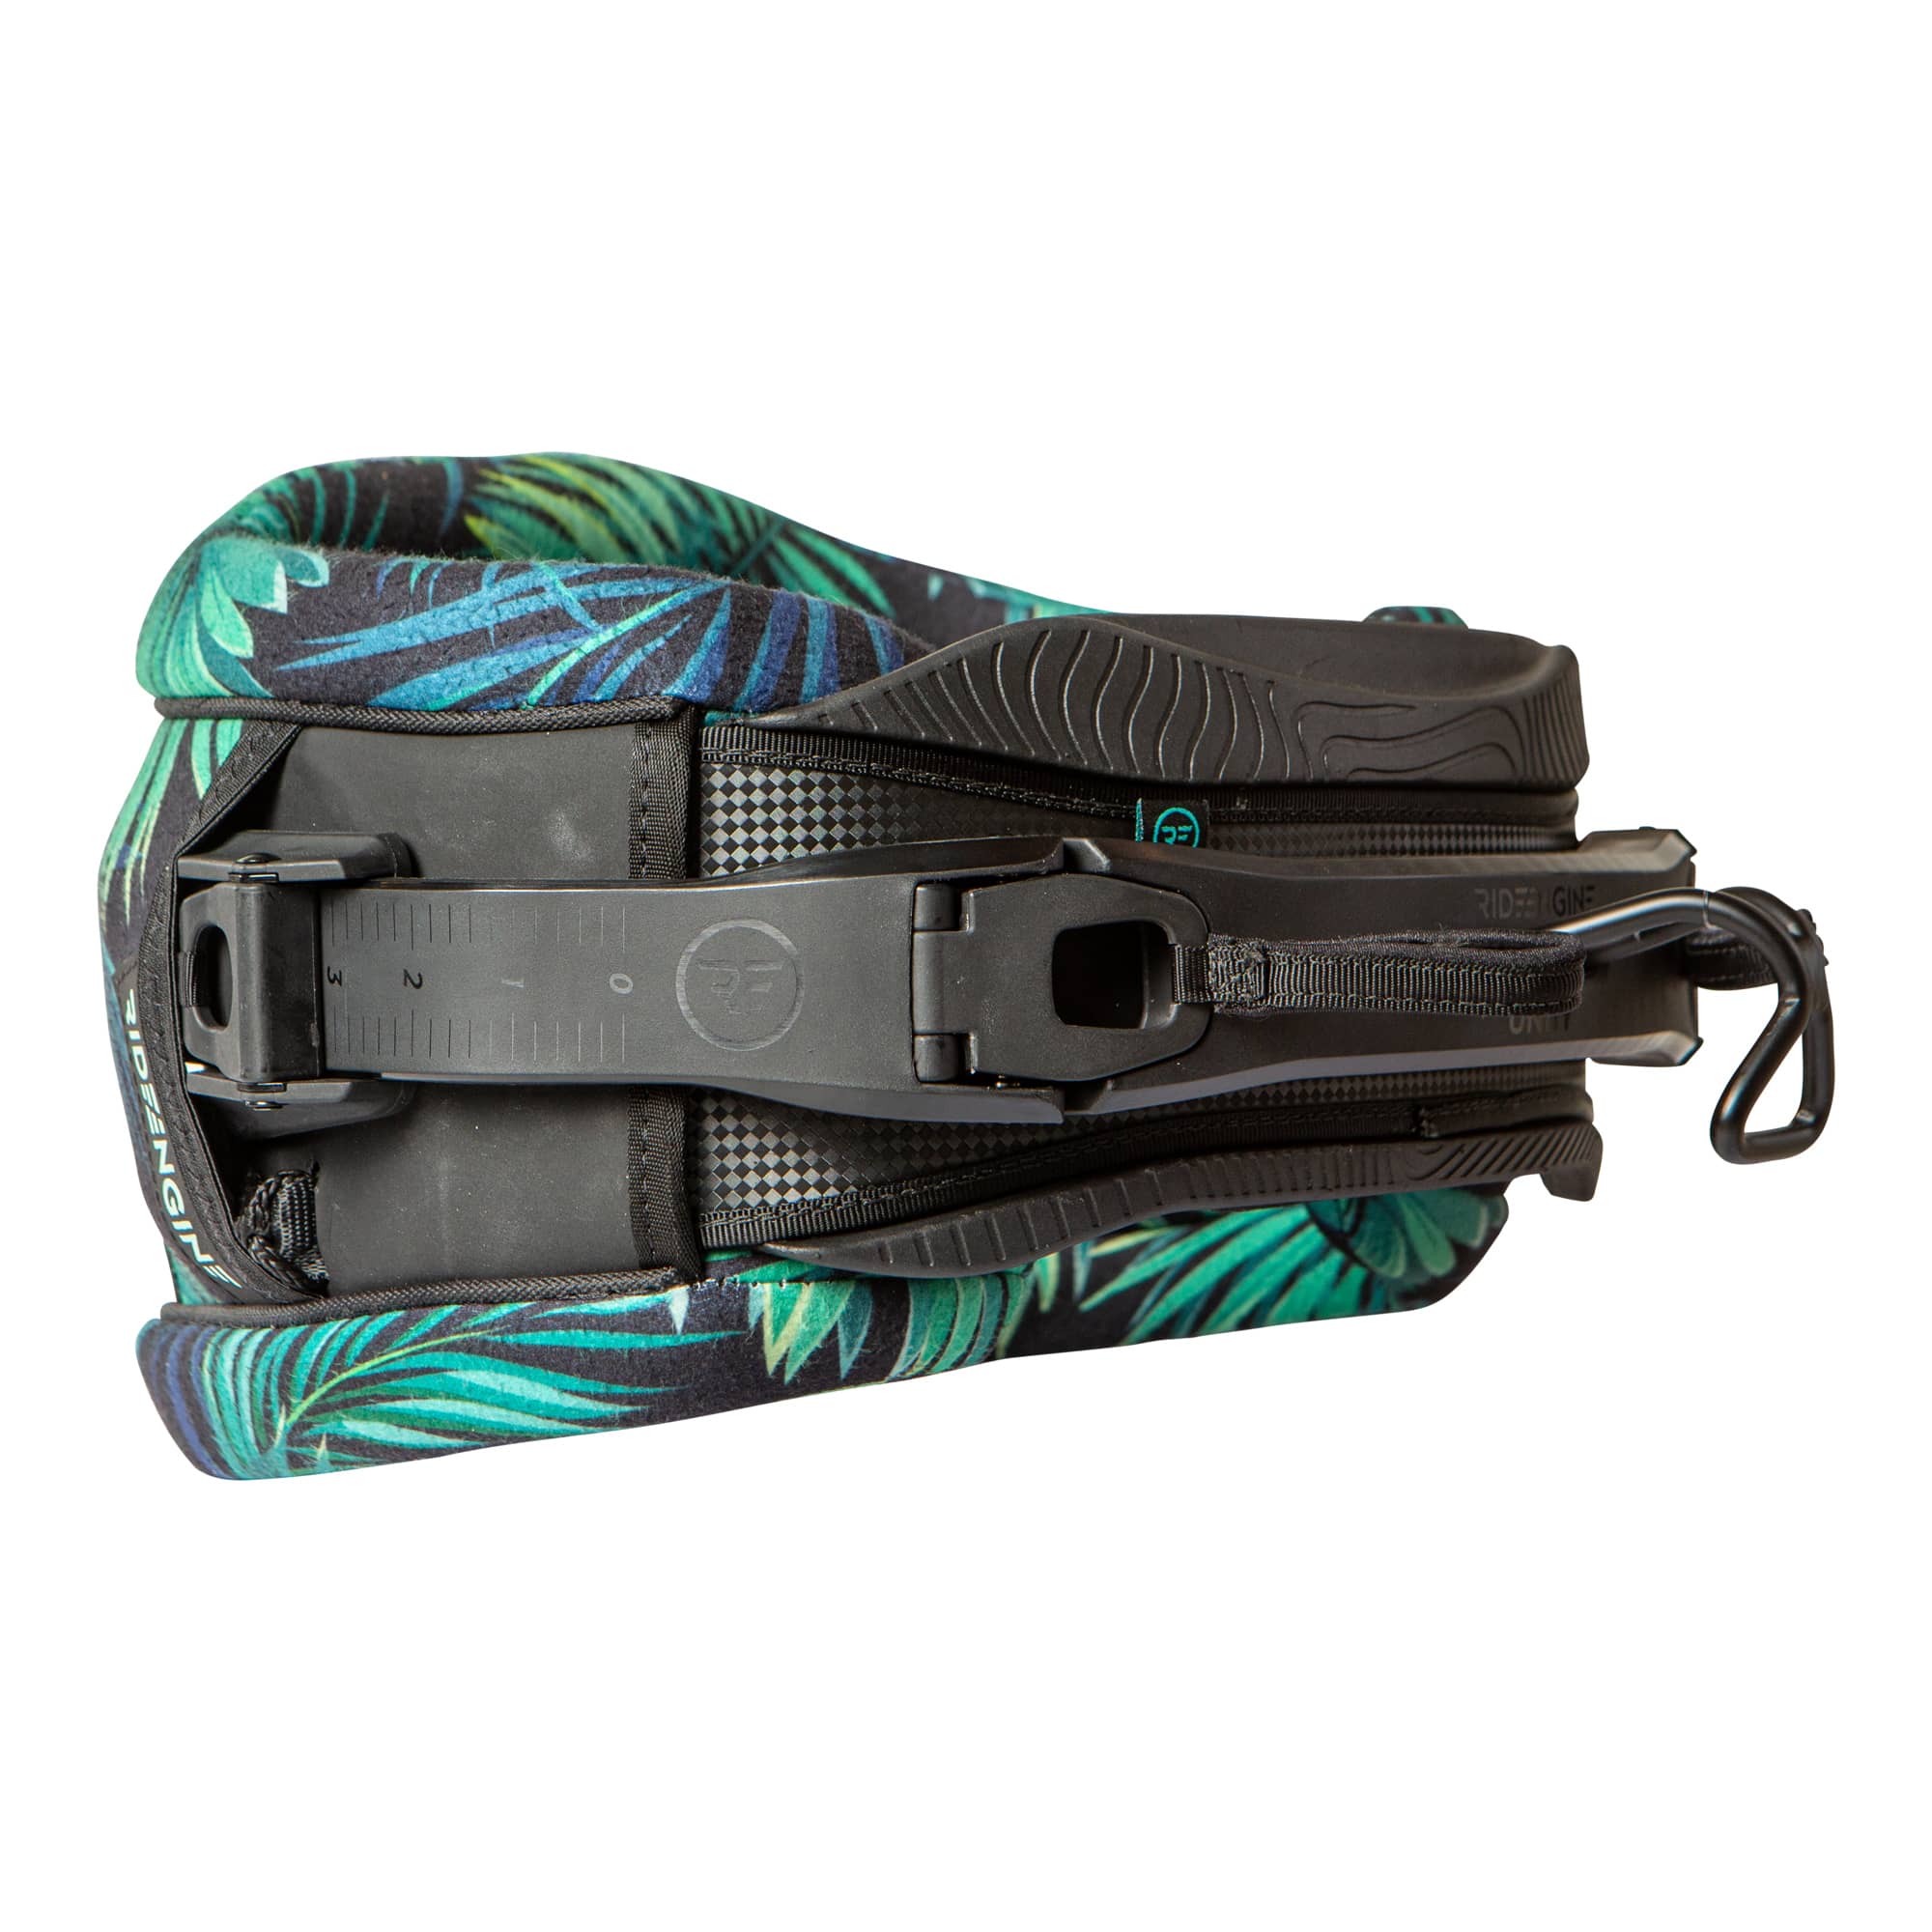 NEW SNOWBOARD Ladder Straps, buckles, leashes - sporting goods